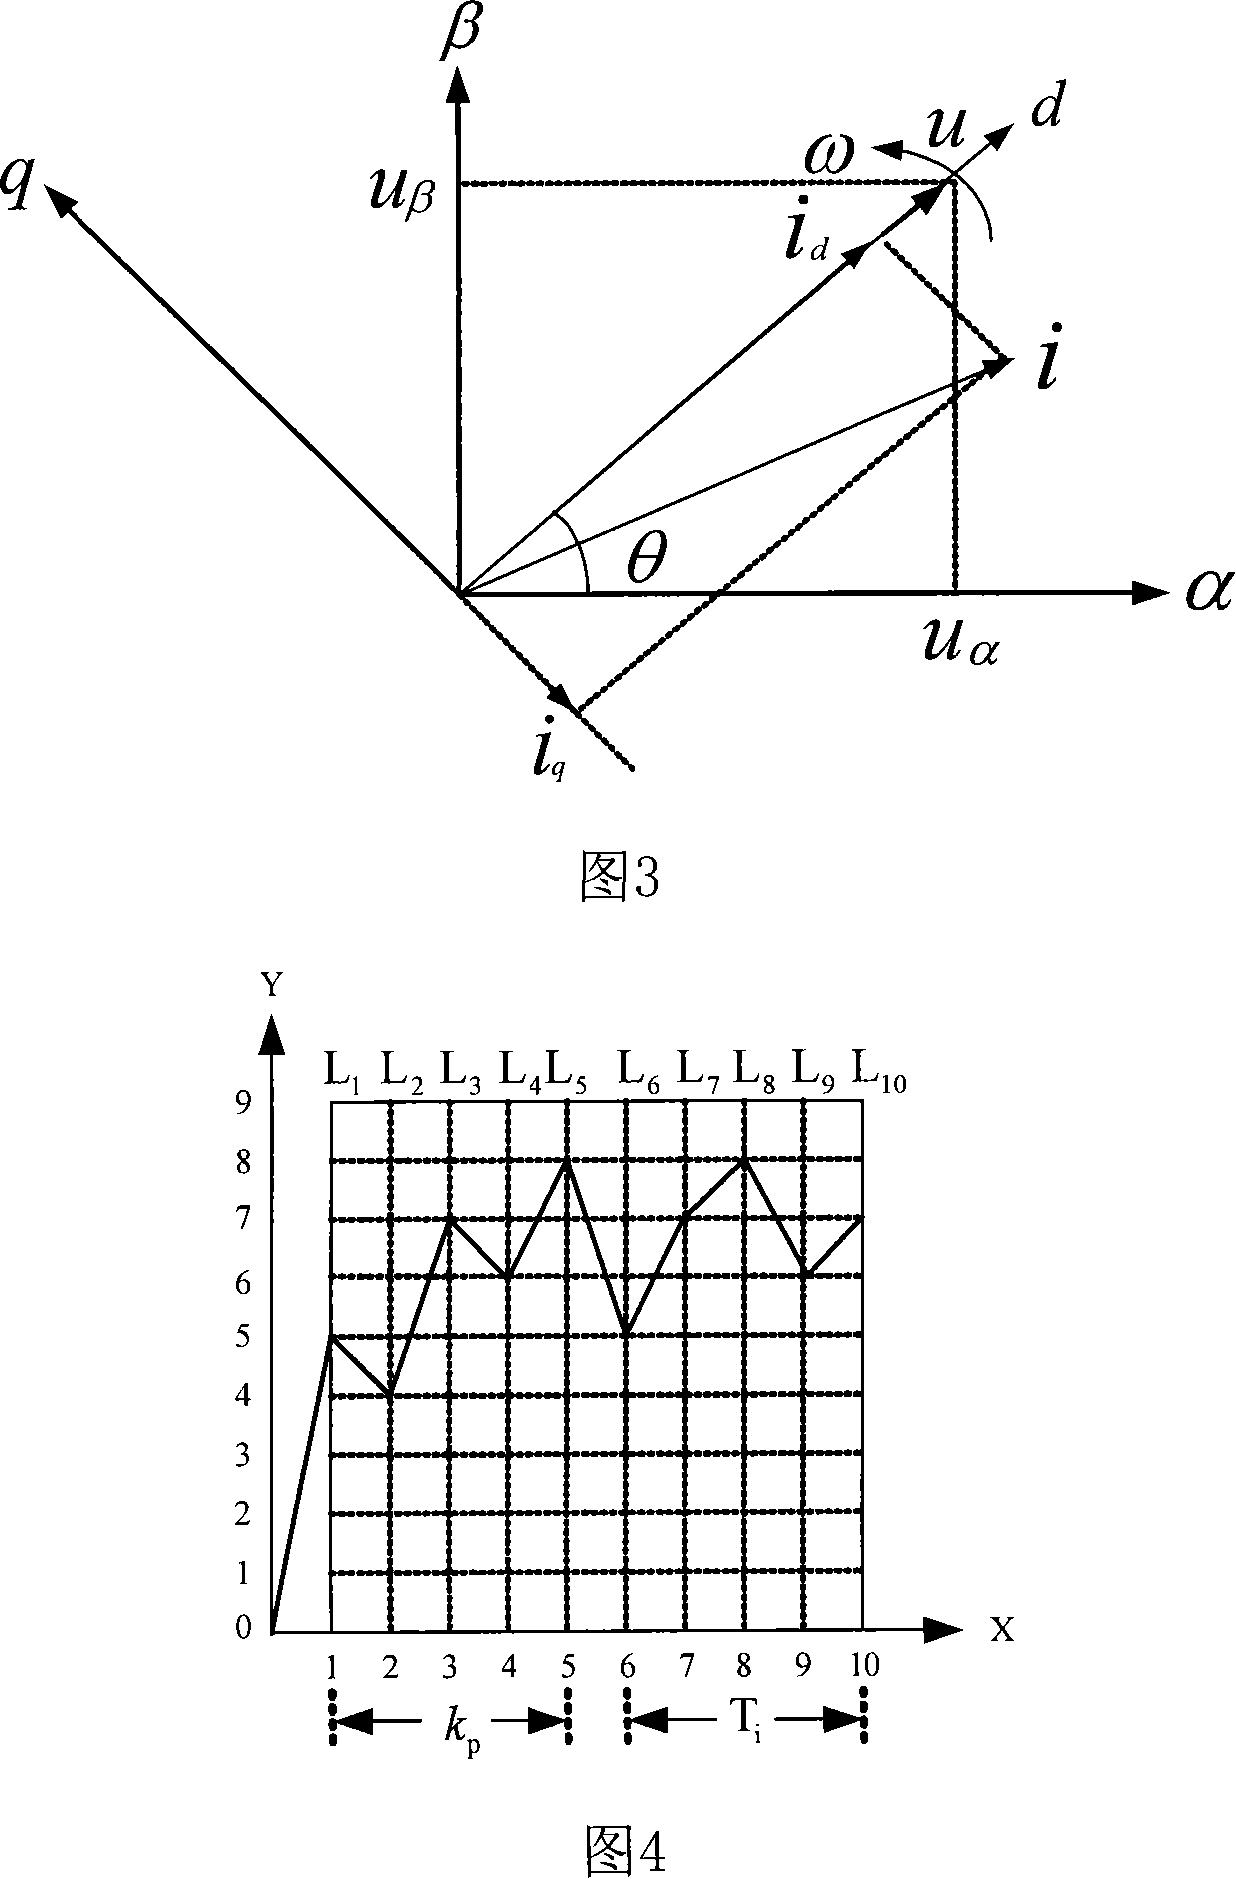 Imbalance compensation and ant colony optimization method of static reactive compensator